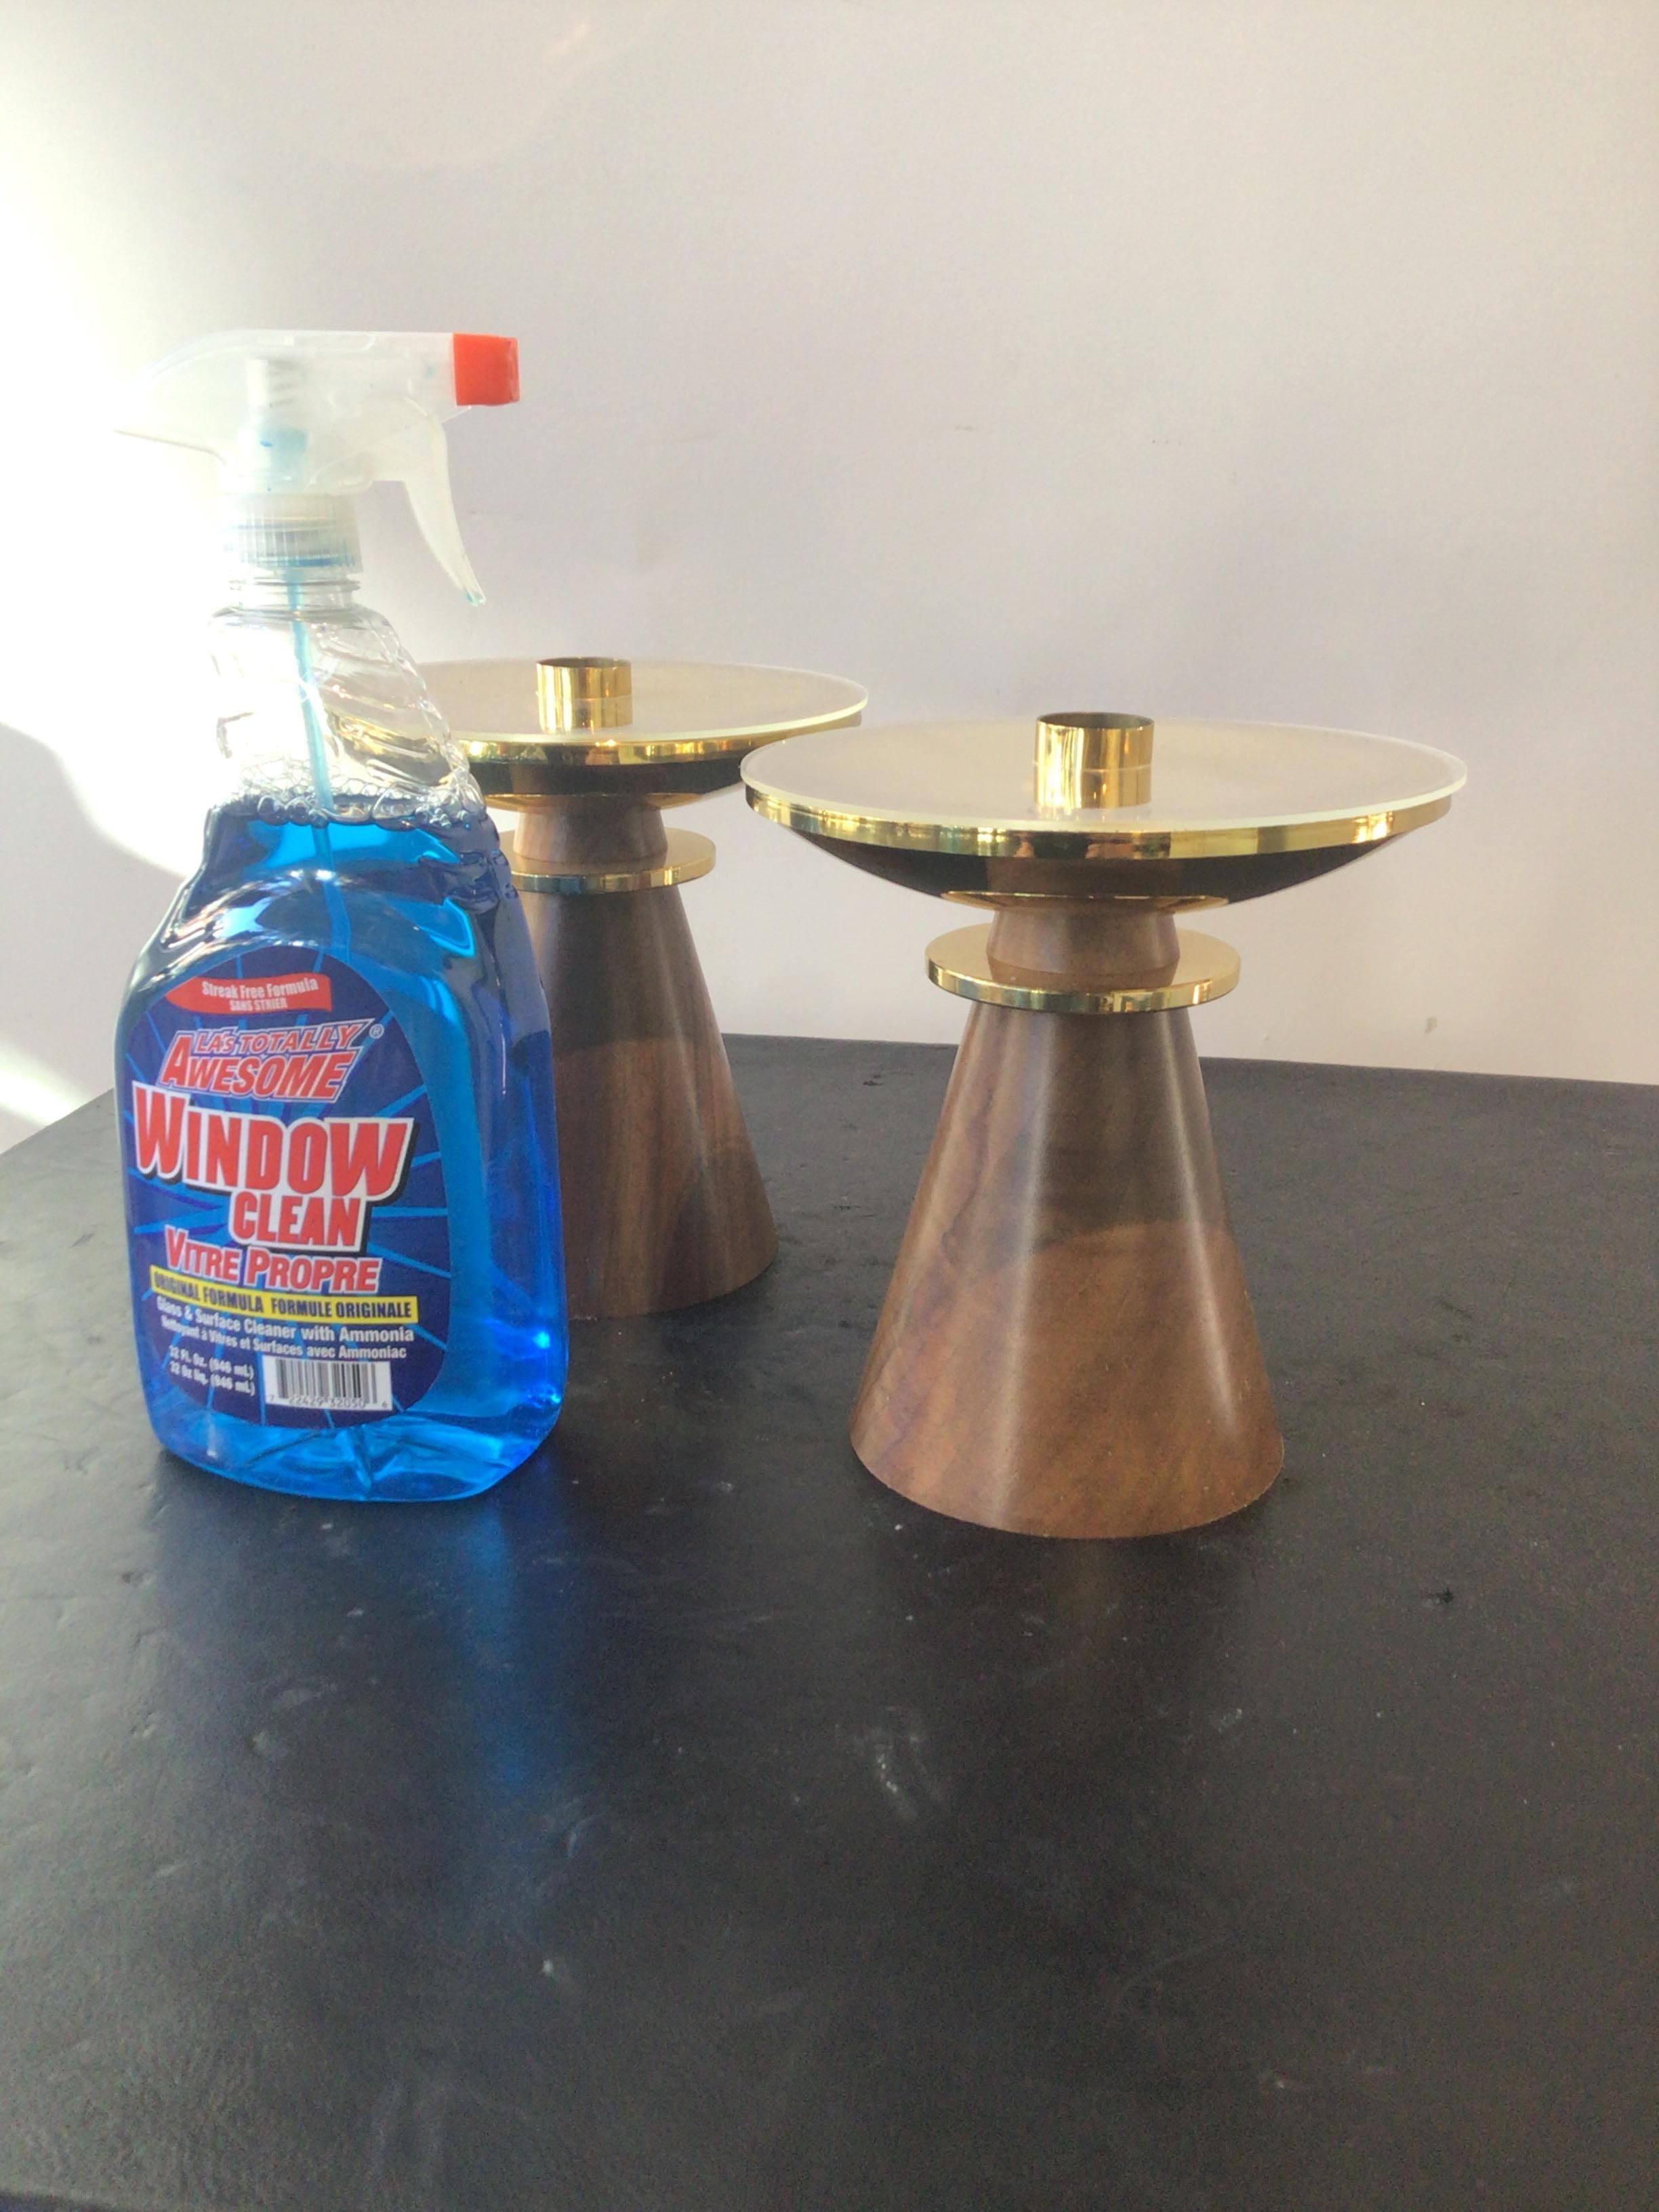 Pair of 1960s brass and walnut Swiss candlesticks. Beautiful design. Purchased from a Scarsdale, NY estate. The owner was a manufacturer of these candlesticks in Switzerland, and imported them into the states in 1964.